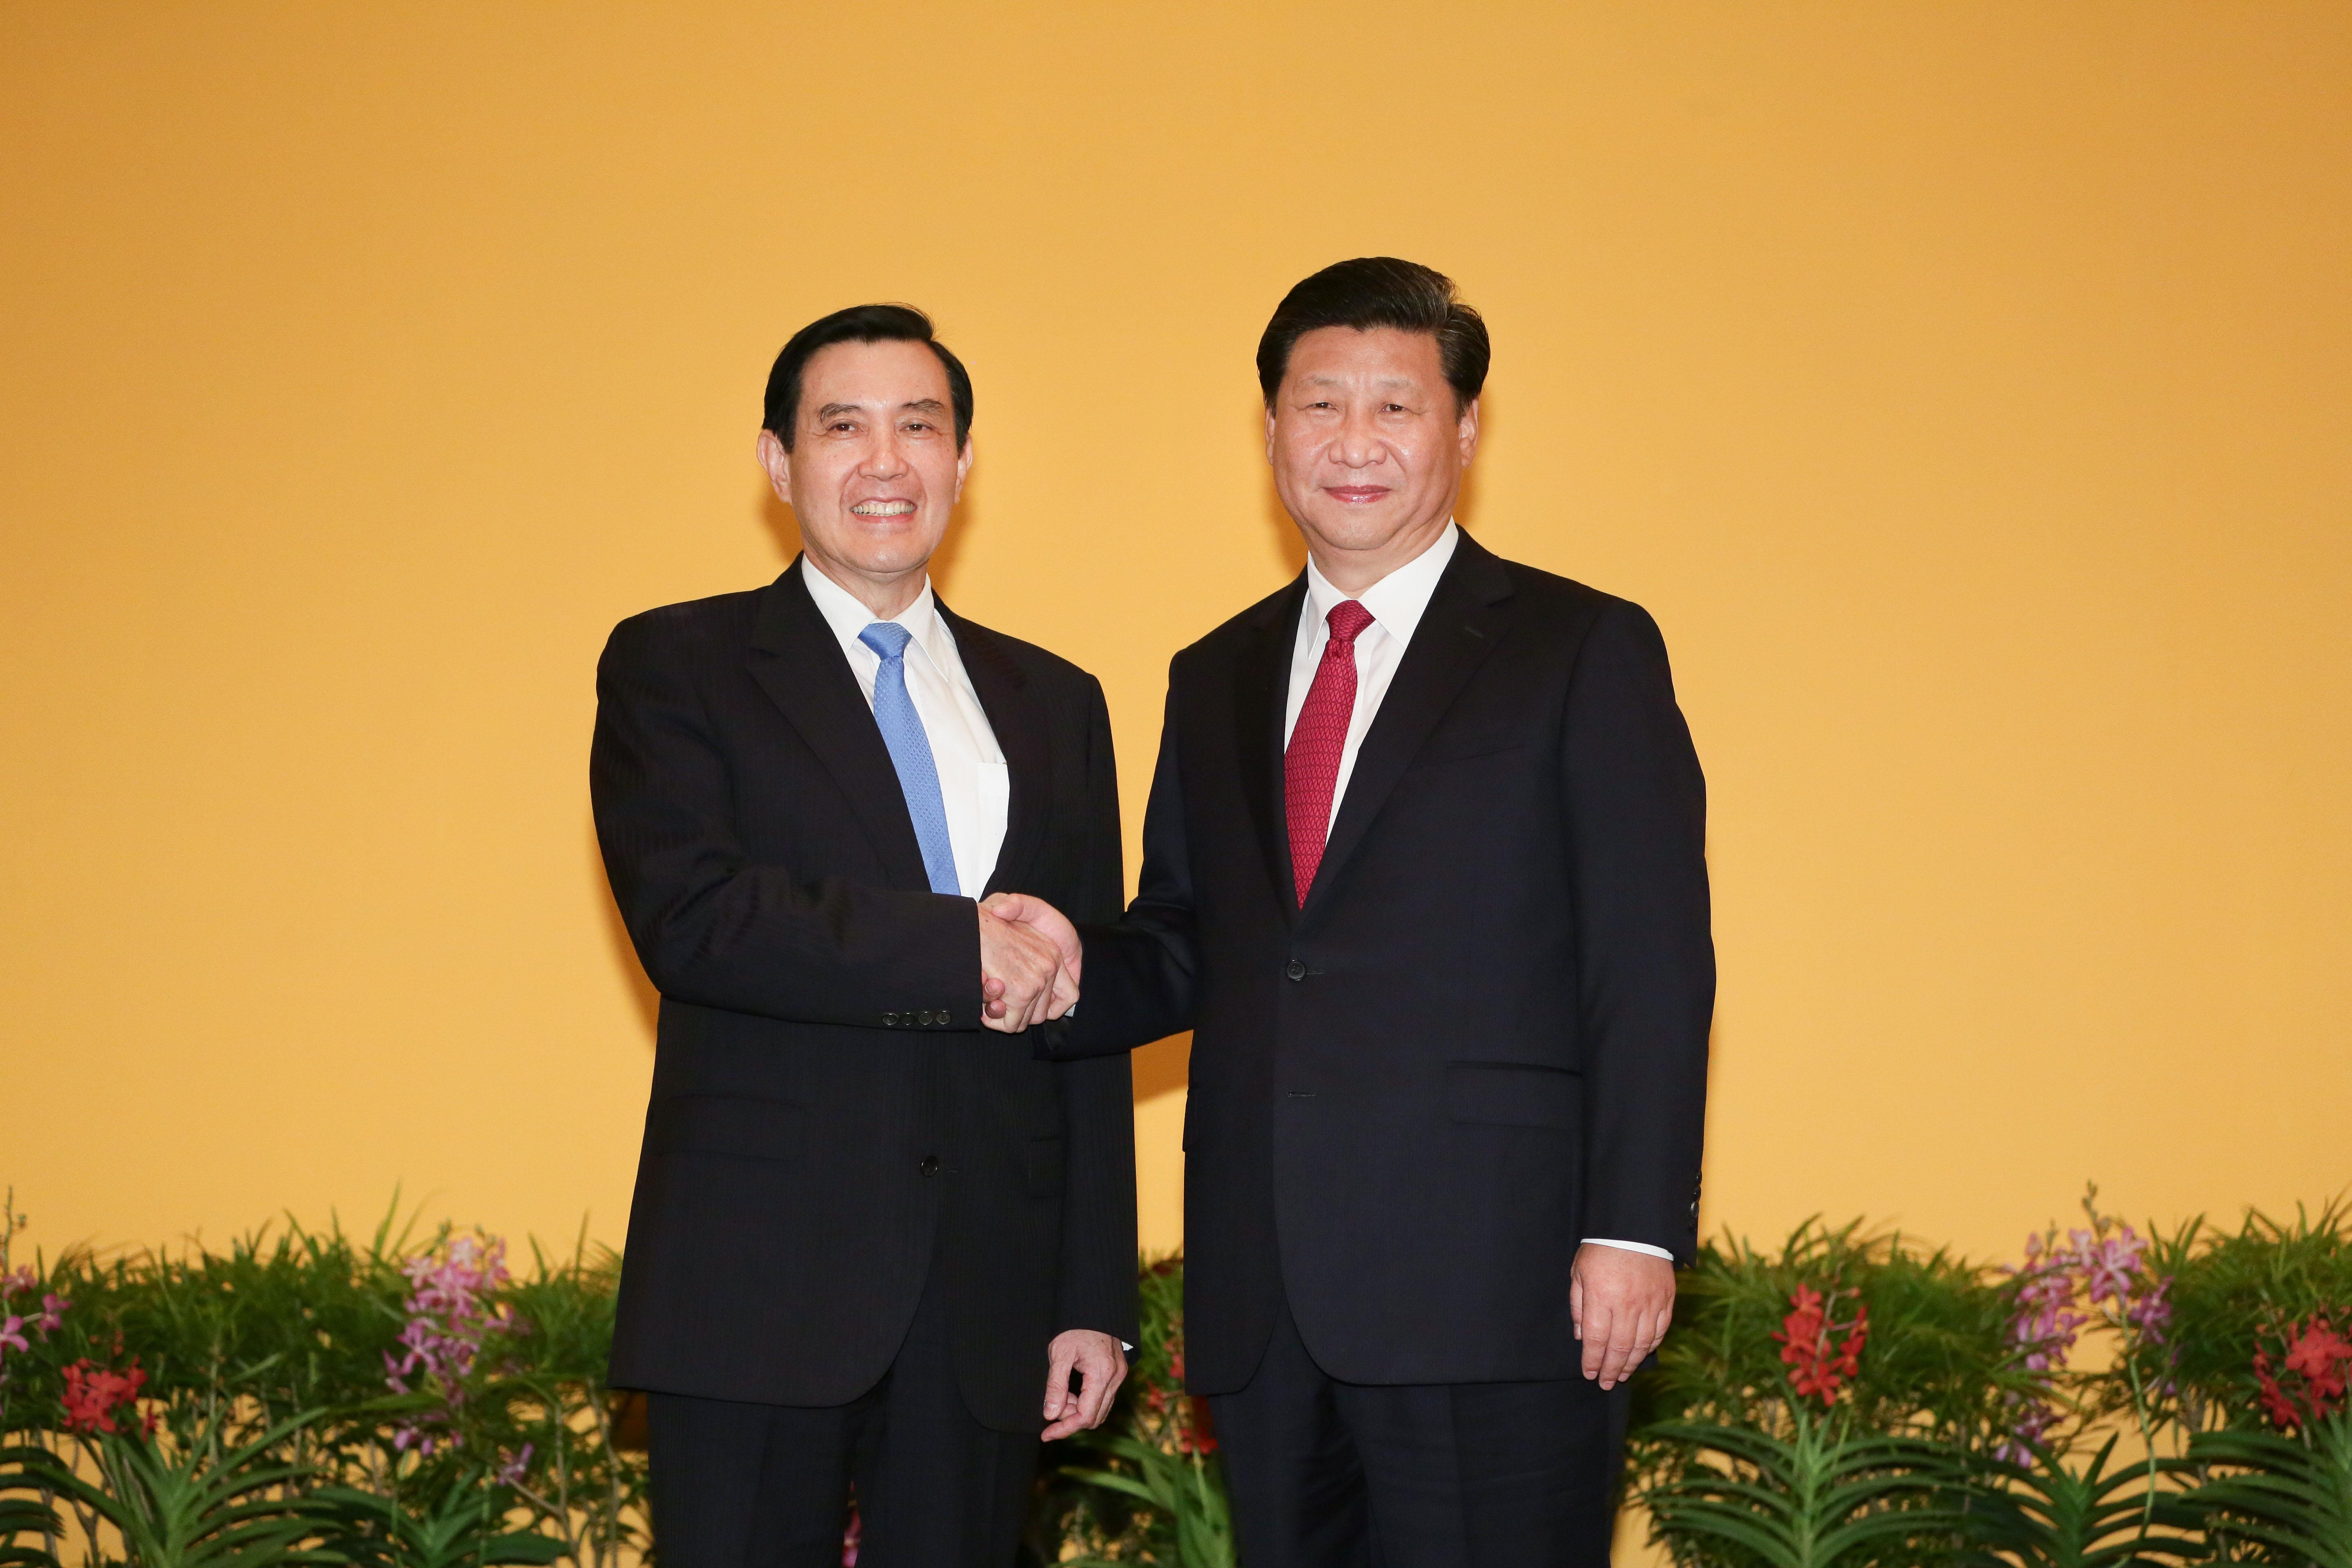 Xi Jinping (right) with Taiwanese president Ma Ying-jeou (left) in November 2015.